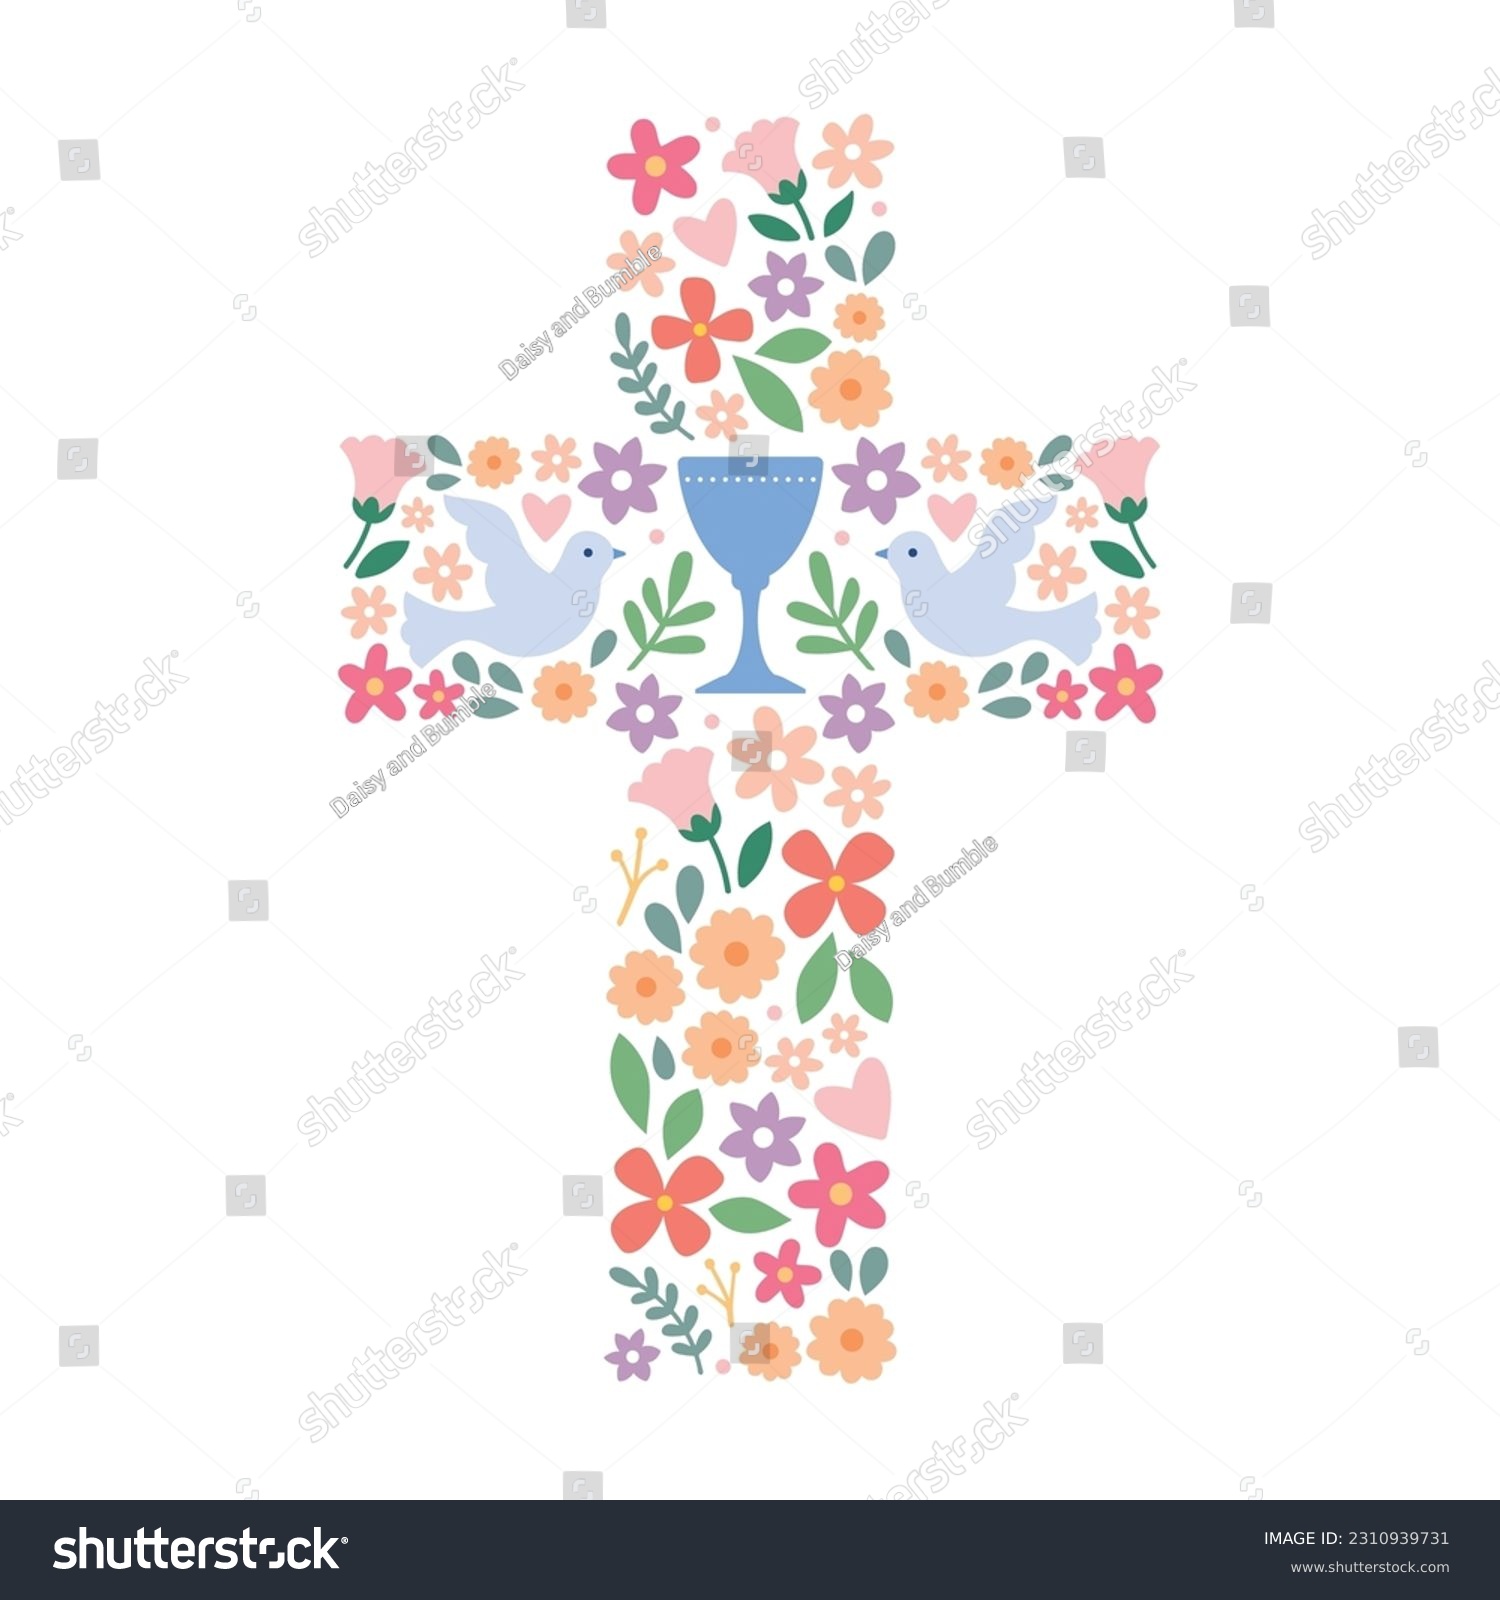 SVG of Catholic Christian Cross with flowers and leaves inside, First Communion cross, Christening, Baptism, vector illustration svg